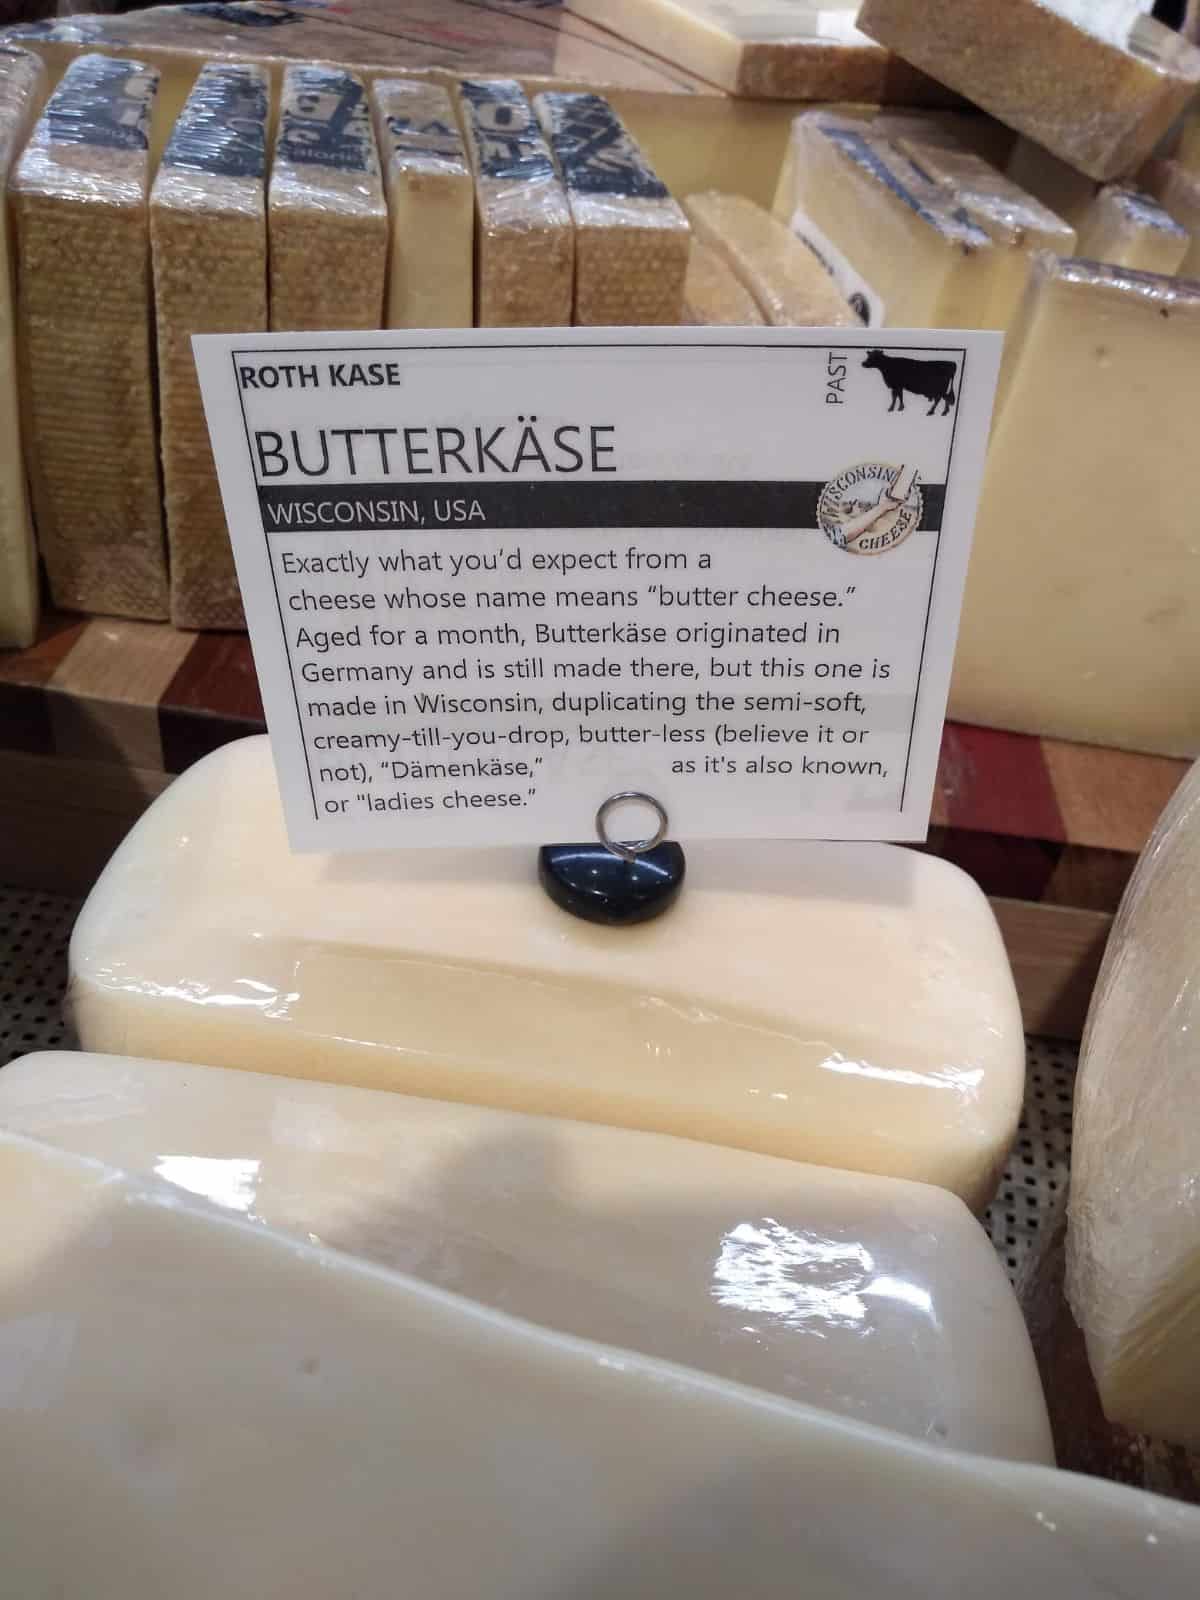 A grocery store display with chunks of Butterkase cheese from Roth Kase.